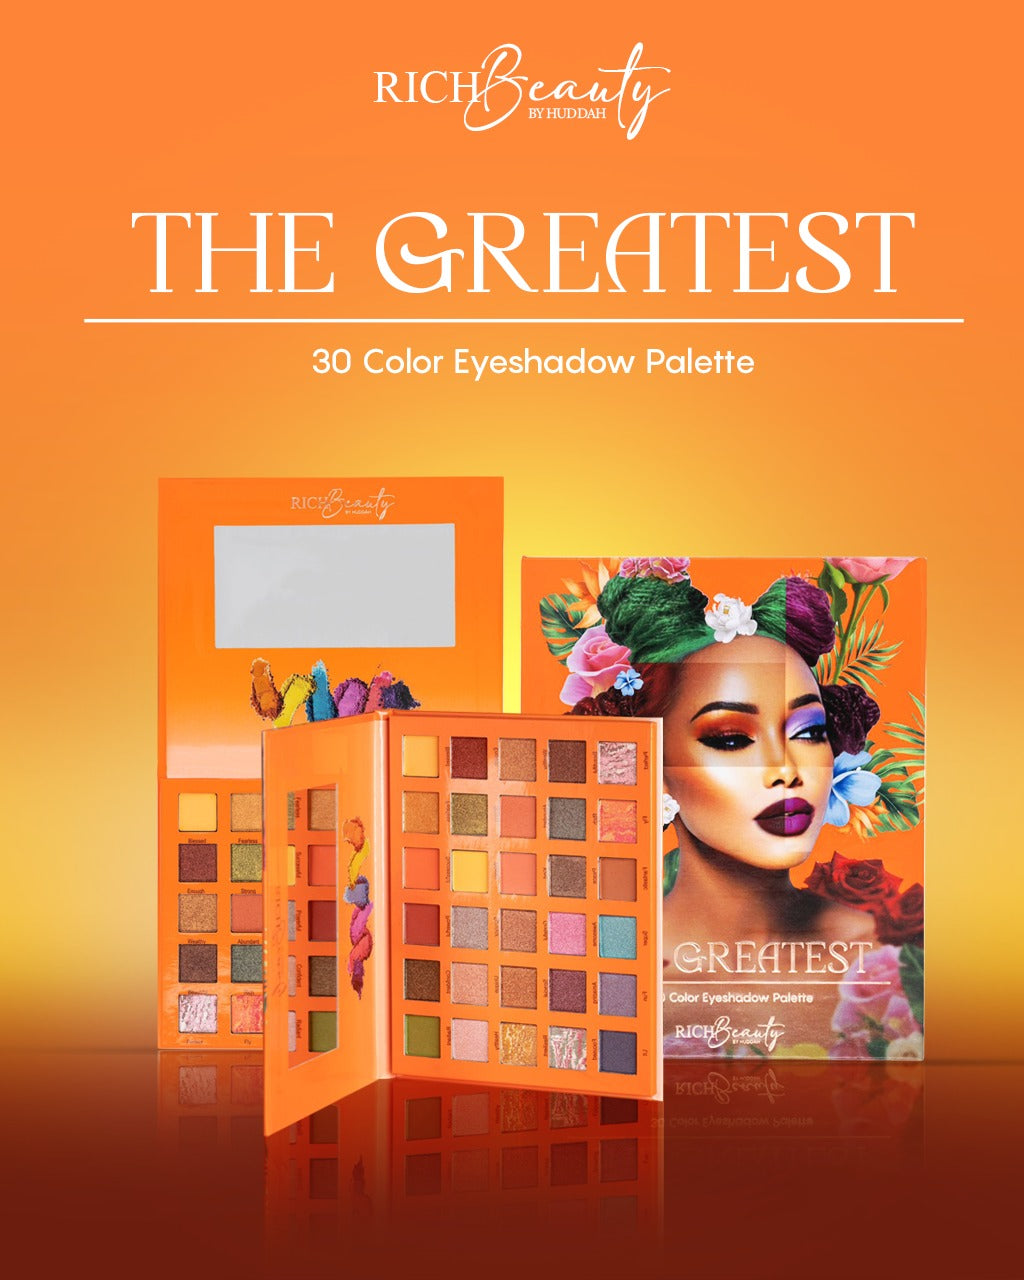 THE GREATEST! 30 COLOUR EYESHADOW PALETTE